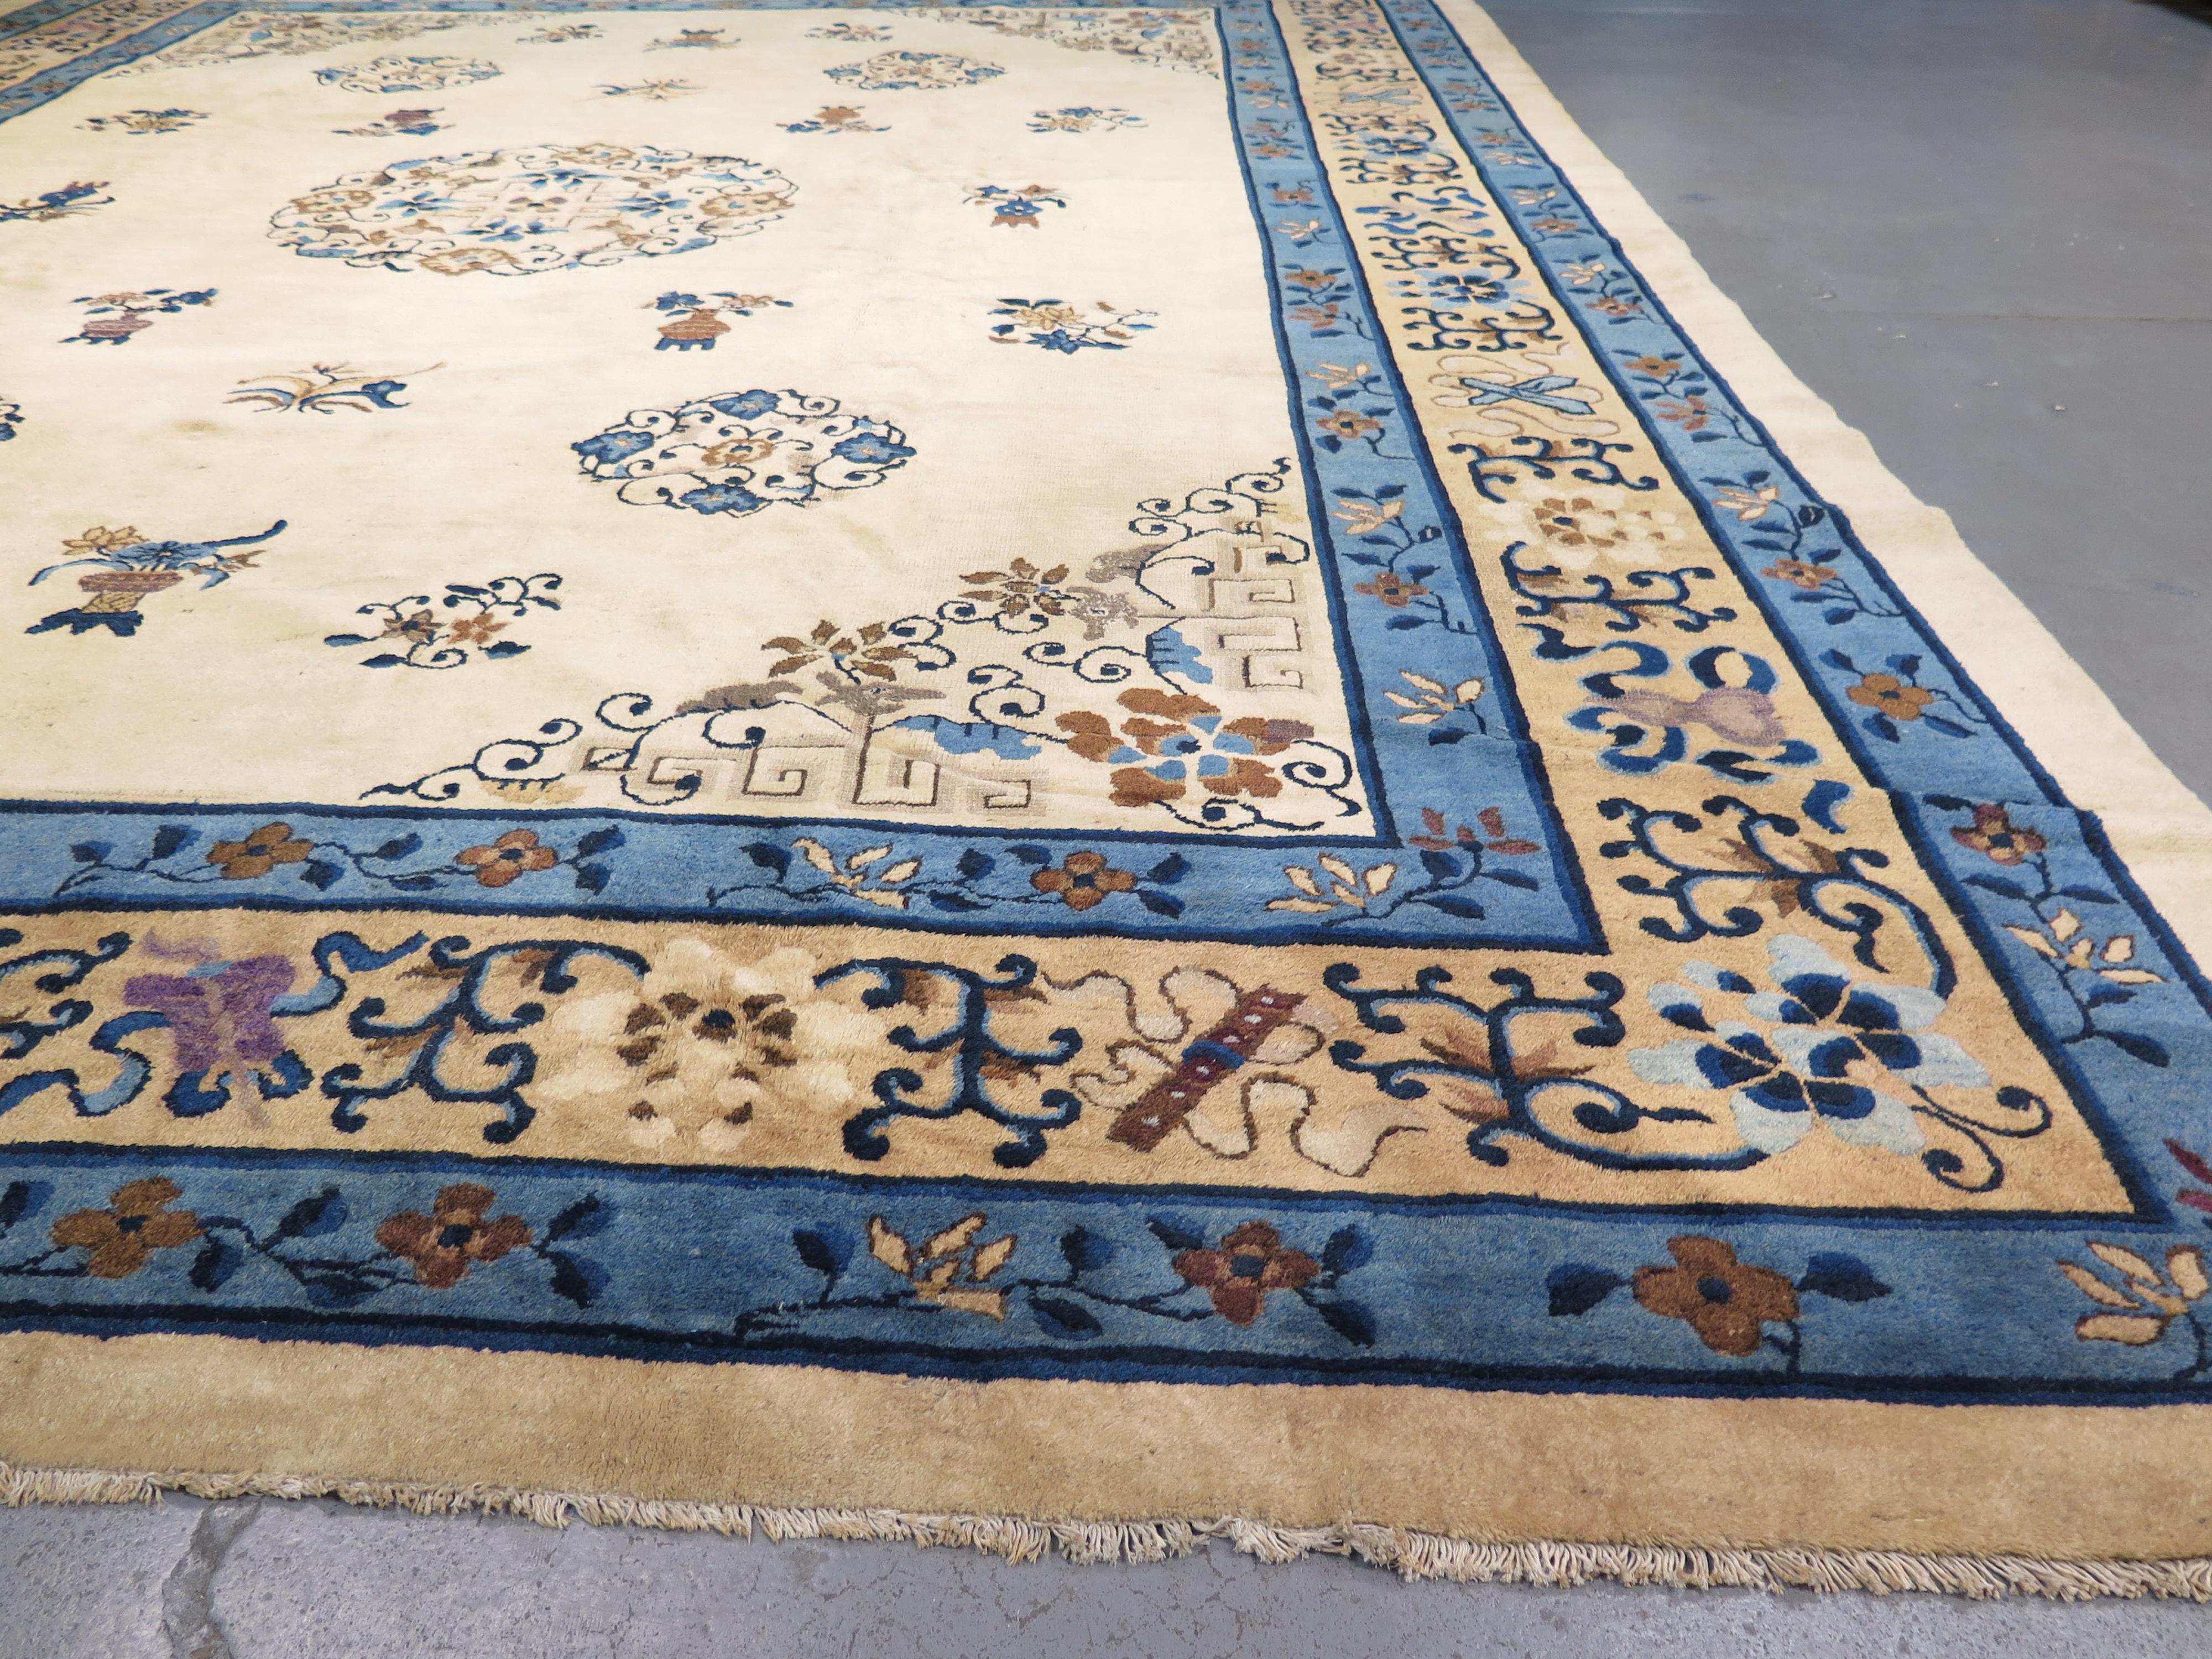 Chinese carpets and textiles have a rich history of weaving, dating back many centuries, particularly in the northern region of Ningxia. As these pieces began to catch the eye of the US and European markets, around the turn of the 20th Century, the